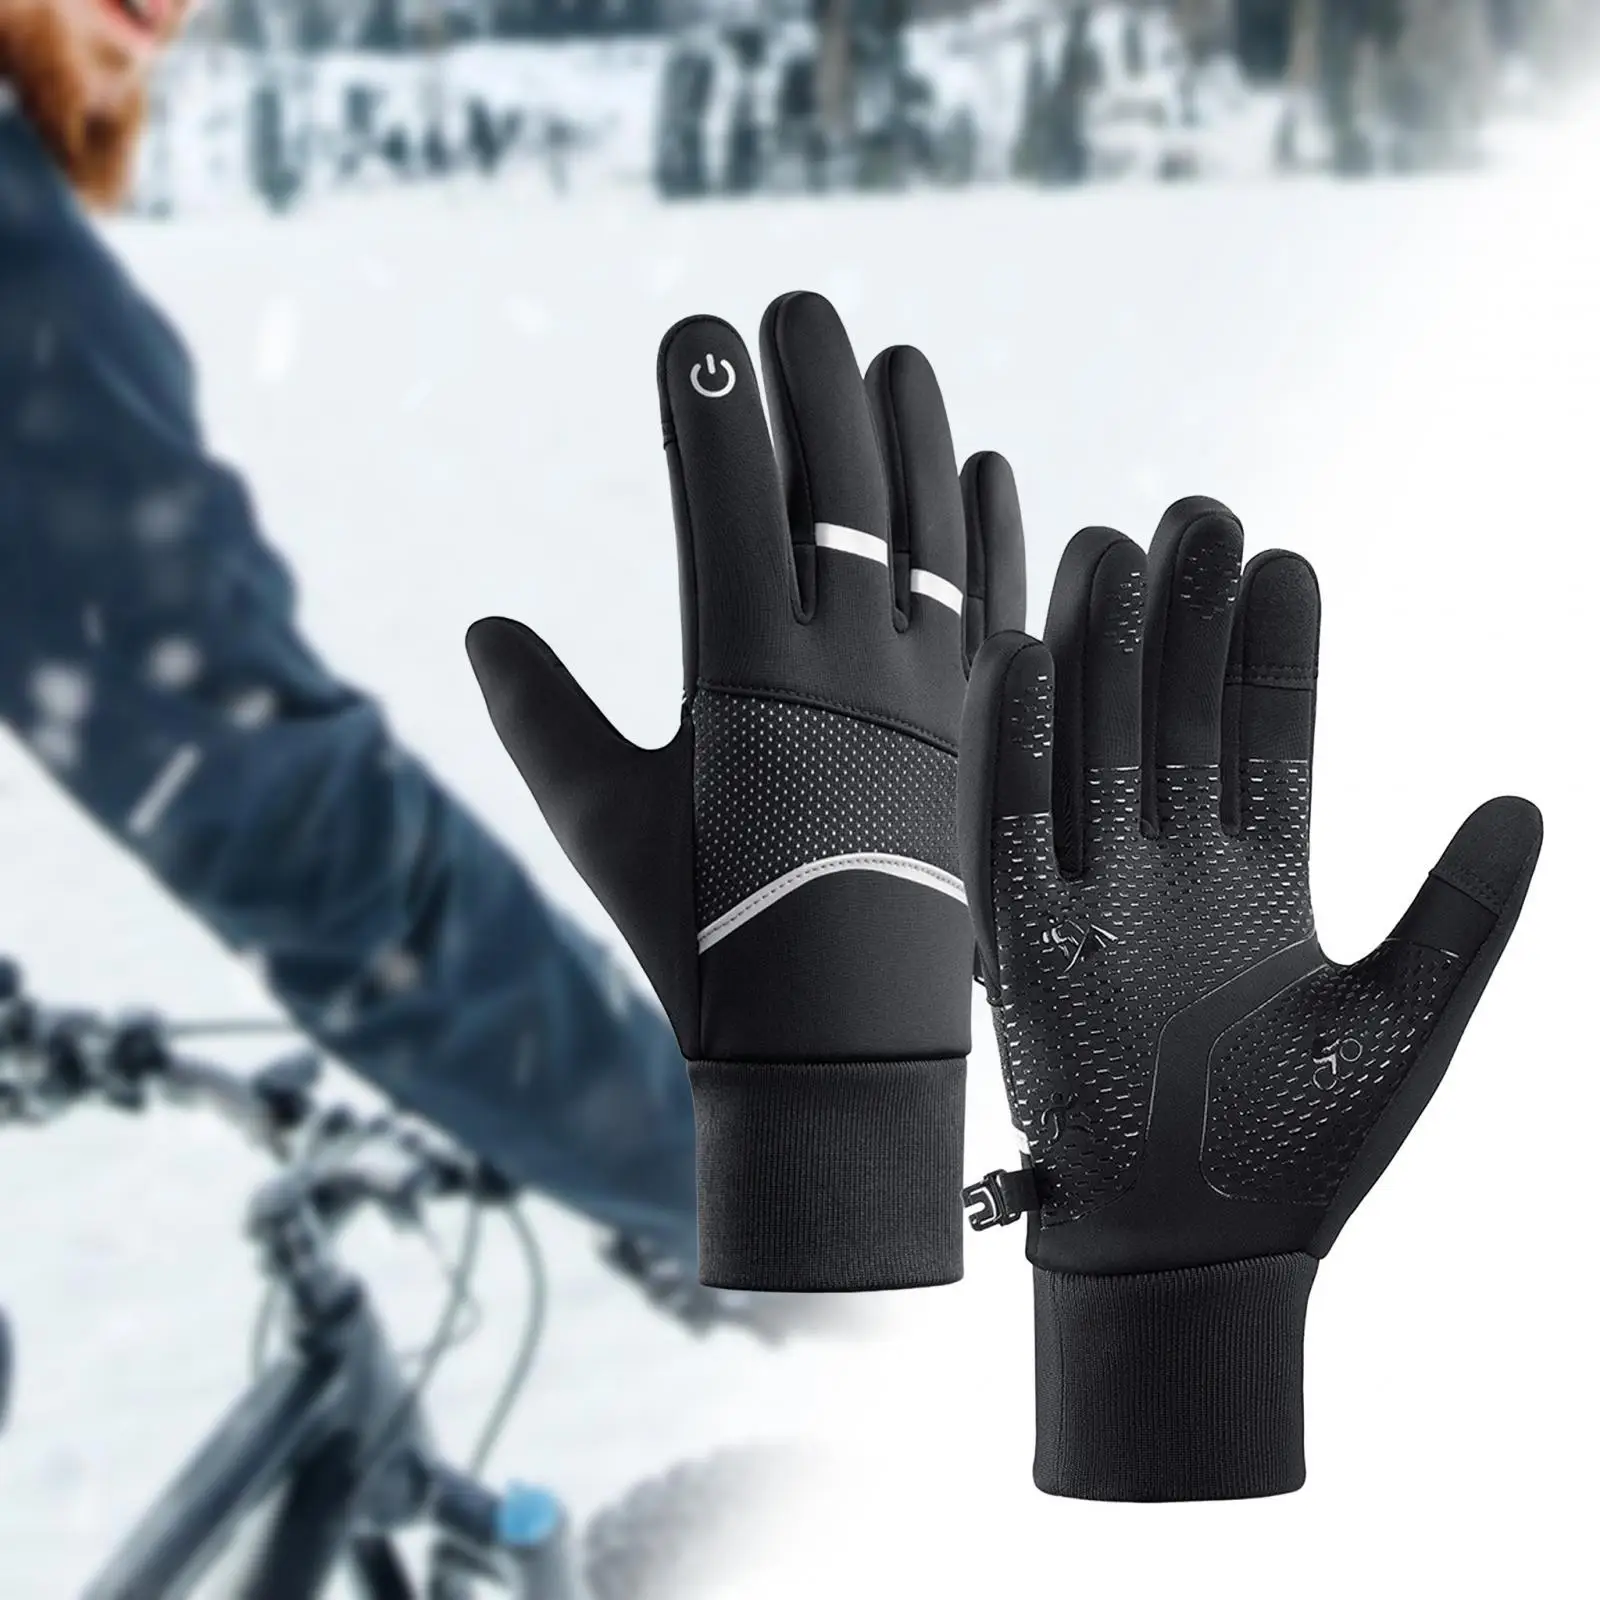 Thermal Winter Gloves Windproof Waterproof Cycling Gloves Cold Weather Glove Work Gloves w/ Reflective Strips for Outdoor Sports